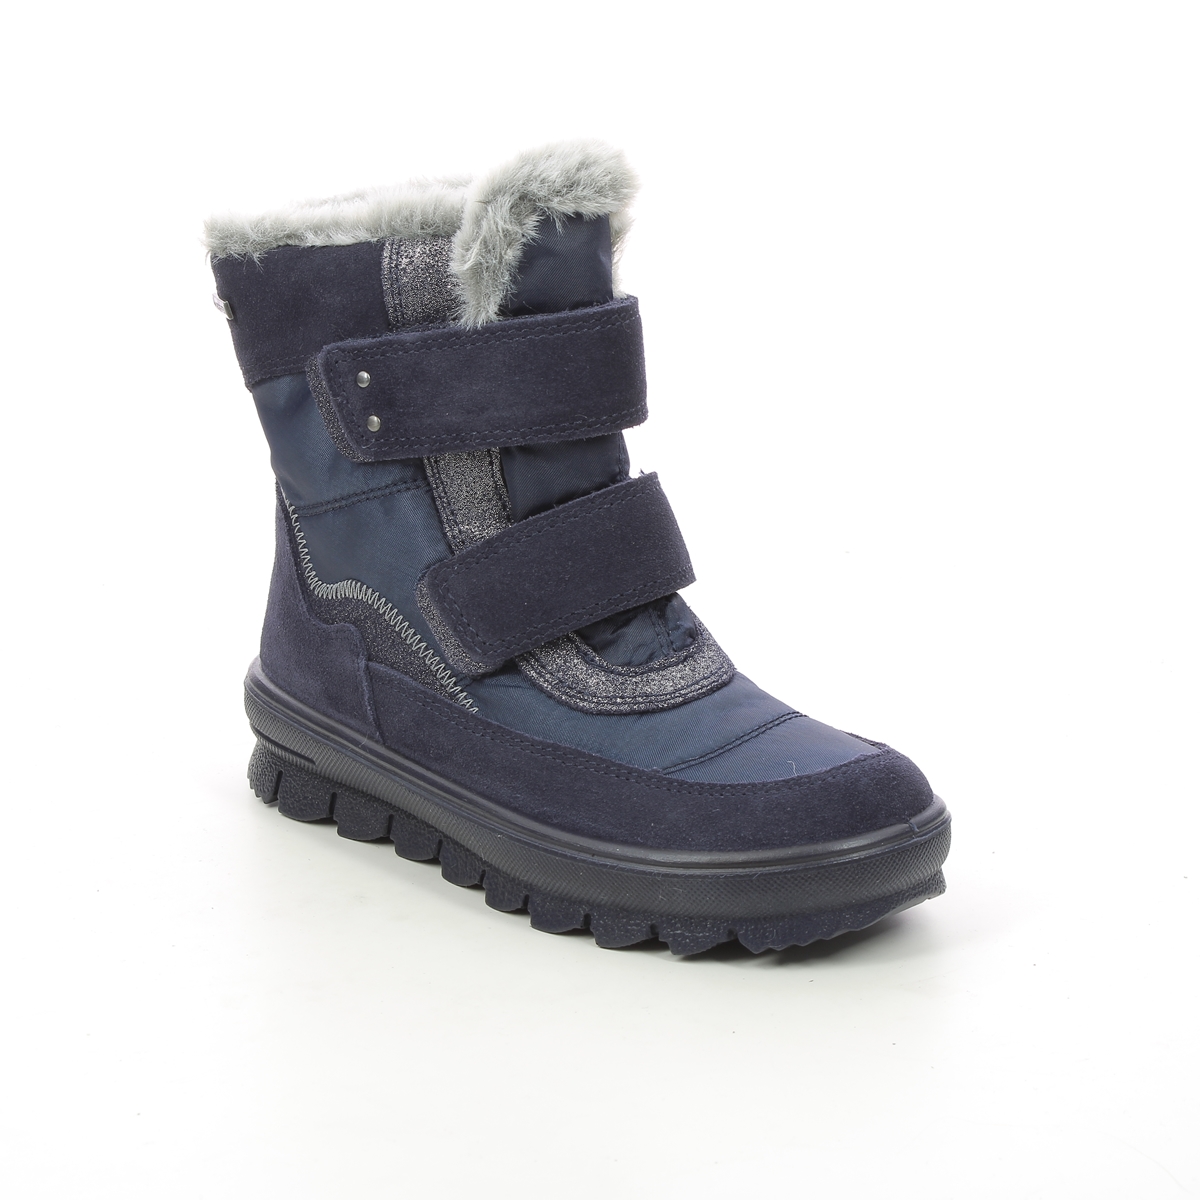 Superfit Flavia Vel Gtx Navy Suede Kids Girls Boots 1009214-8000 In Size 31 In Plain Navy Suede For kids